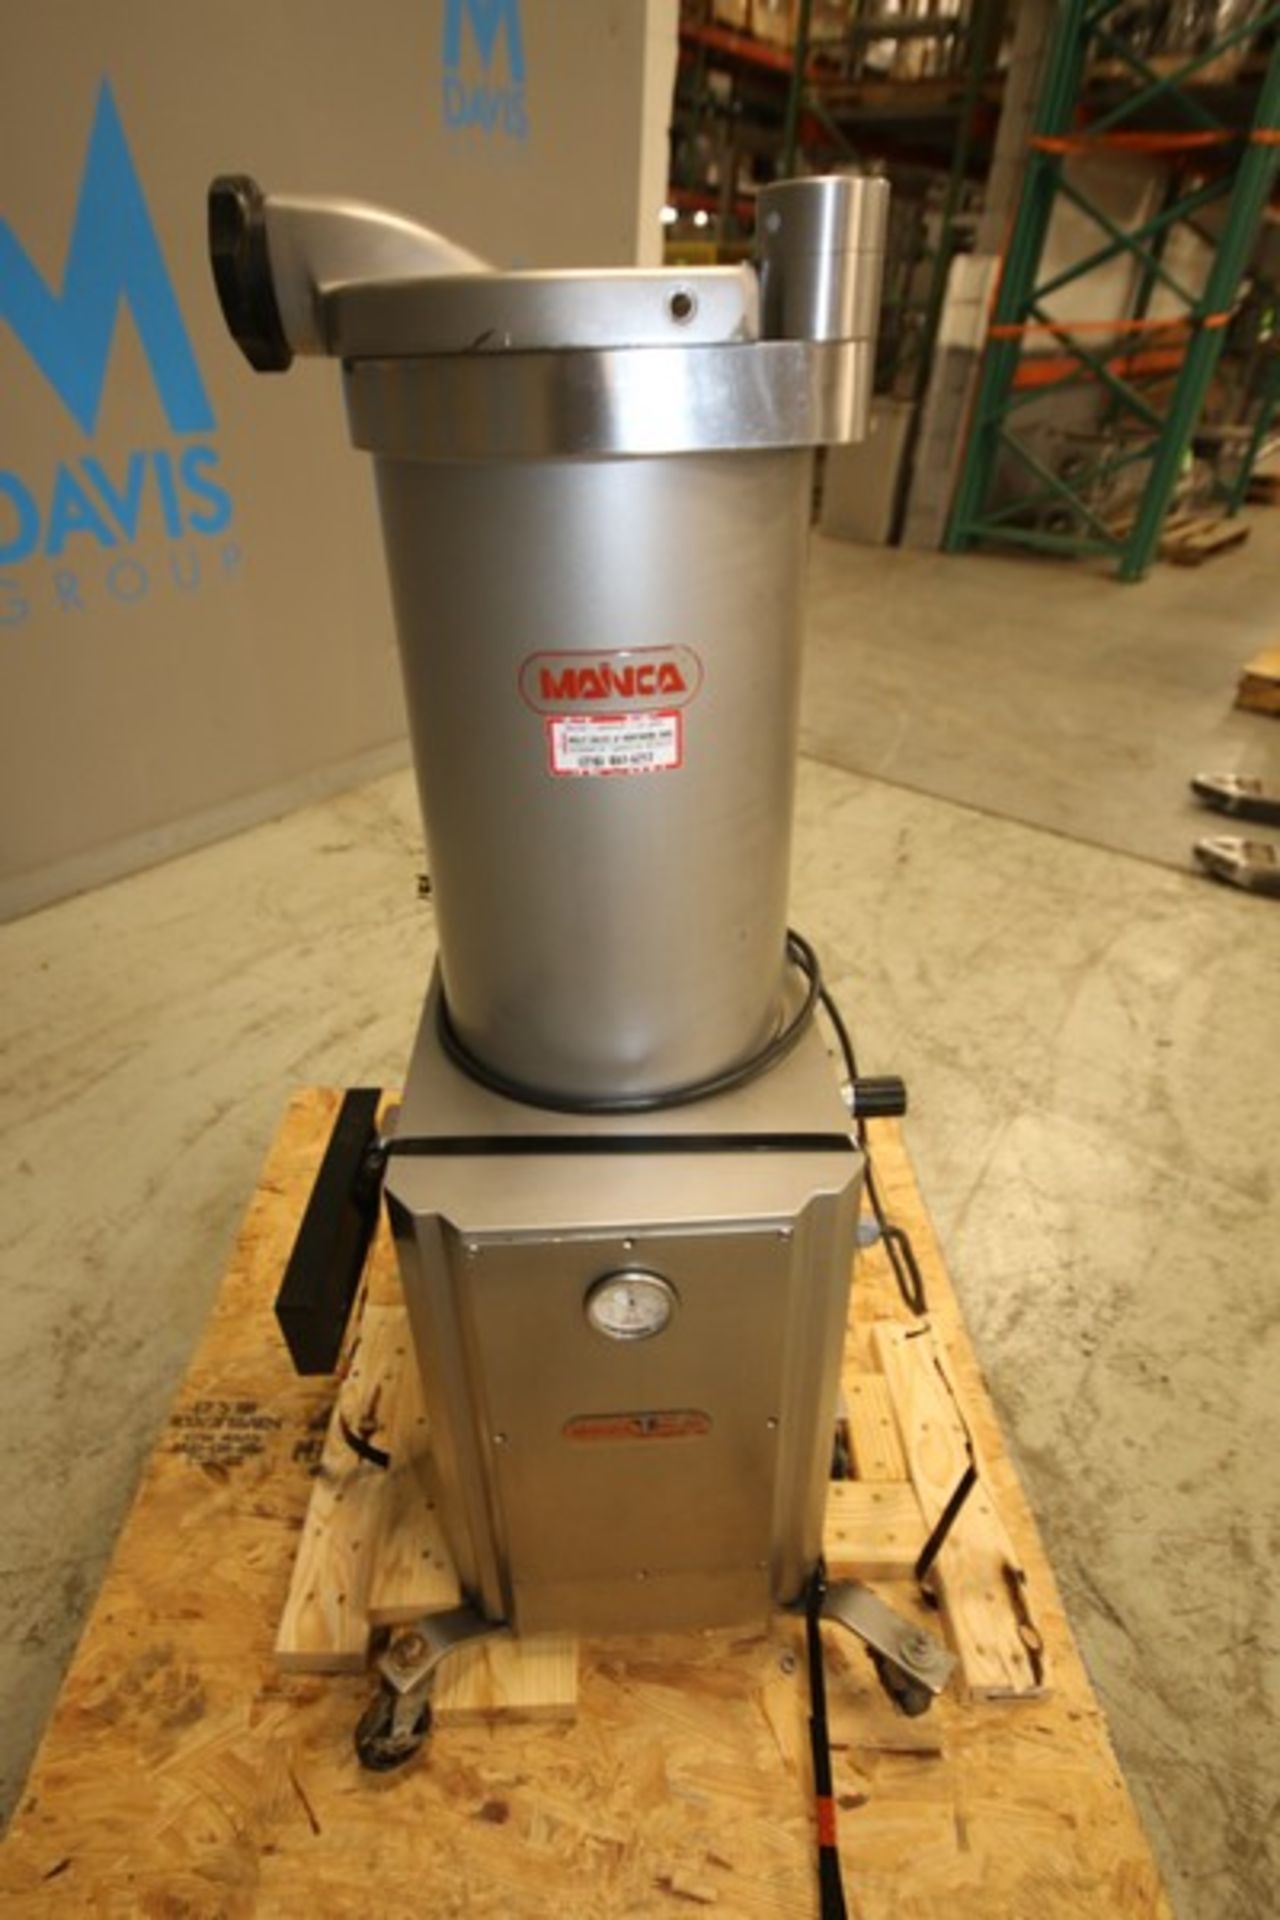 Mainca S/S Sausage Stuffer, Model EI-30 INT, SN 6780N, 220V (INV#103004) (Located @ the MDG - Image 3 of 7